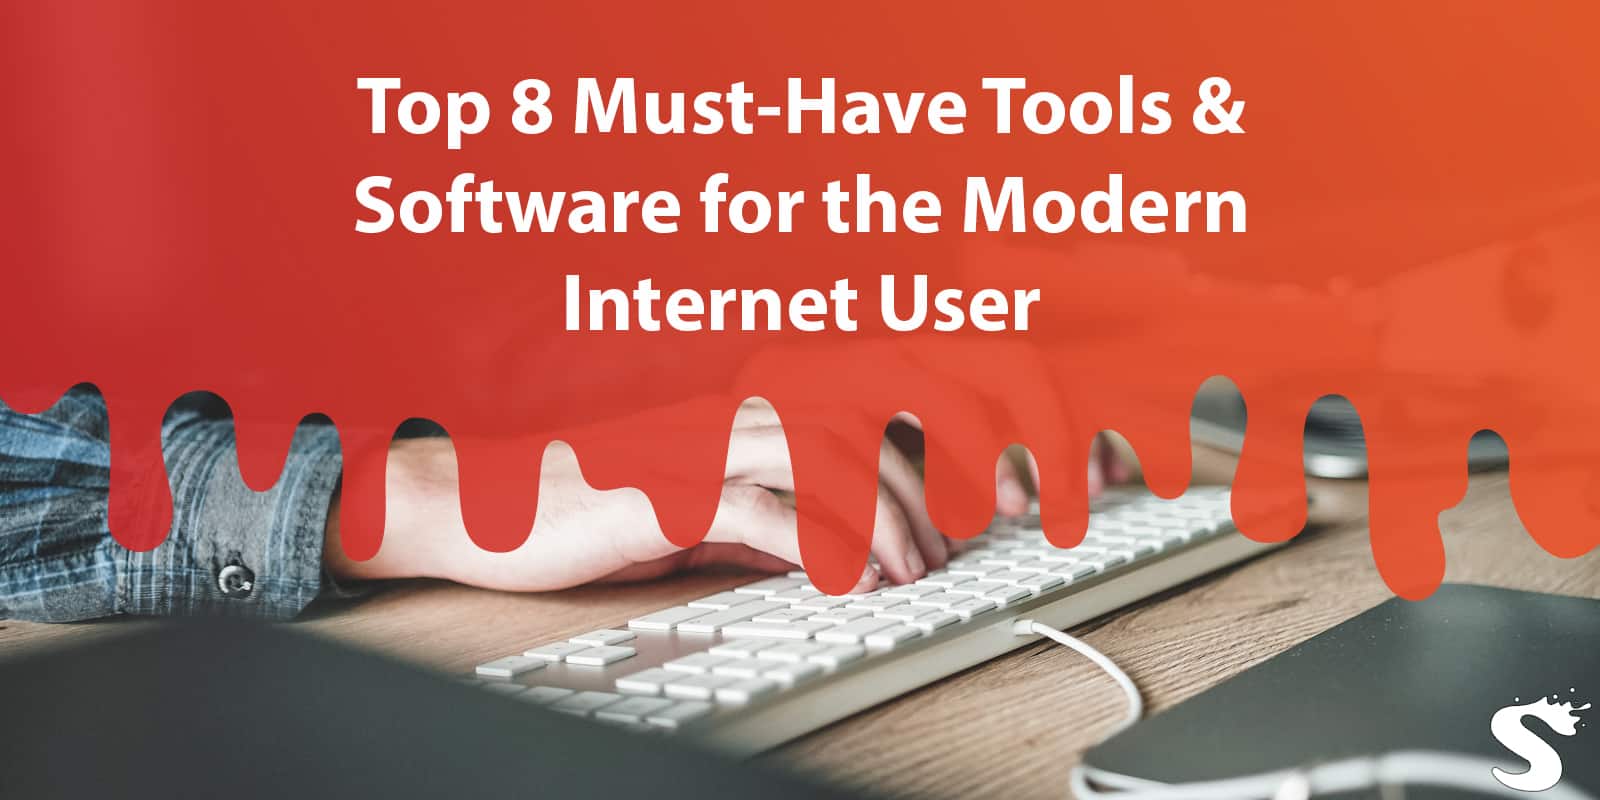 Top 8 Must-Have Tools & Software for the Modern Internet User